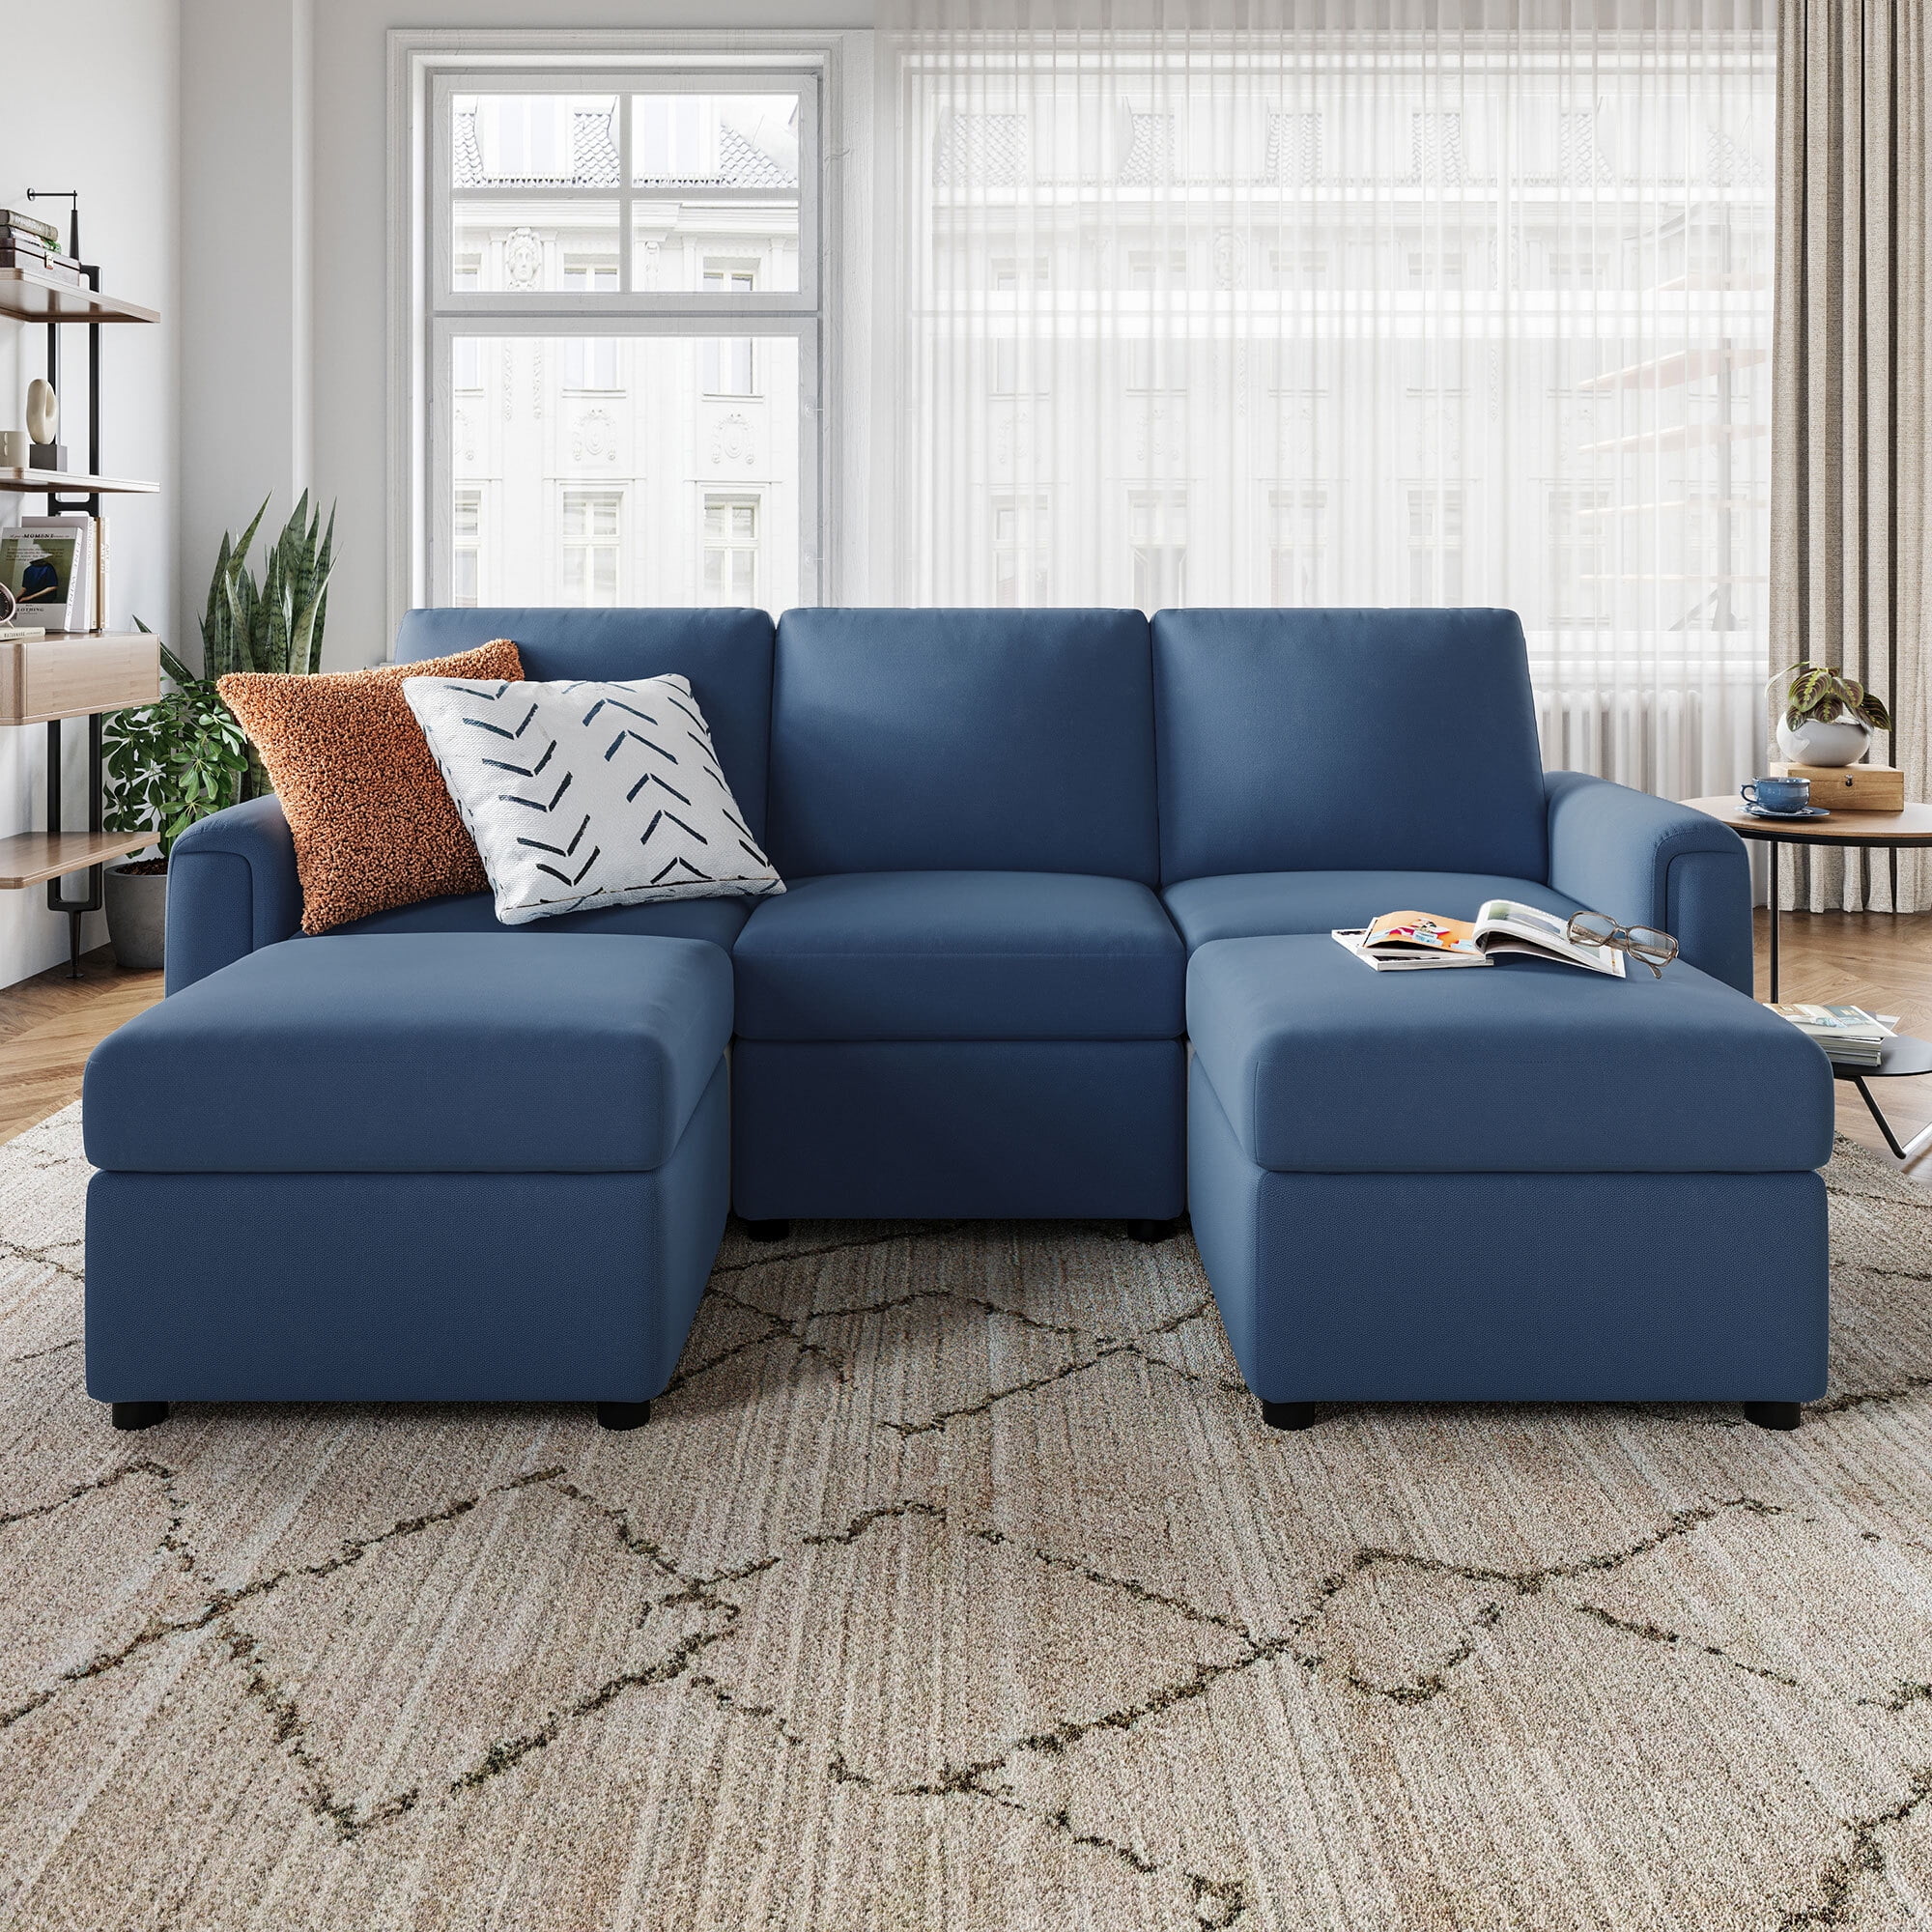 LINSY HOME Modular Couches and Sofas Sectional with Storage Sectional Sofa  U Shaped Sectional Couch with Reversible Chaises, Blue 